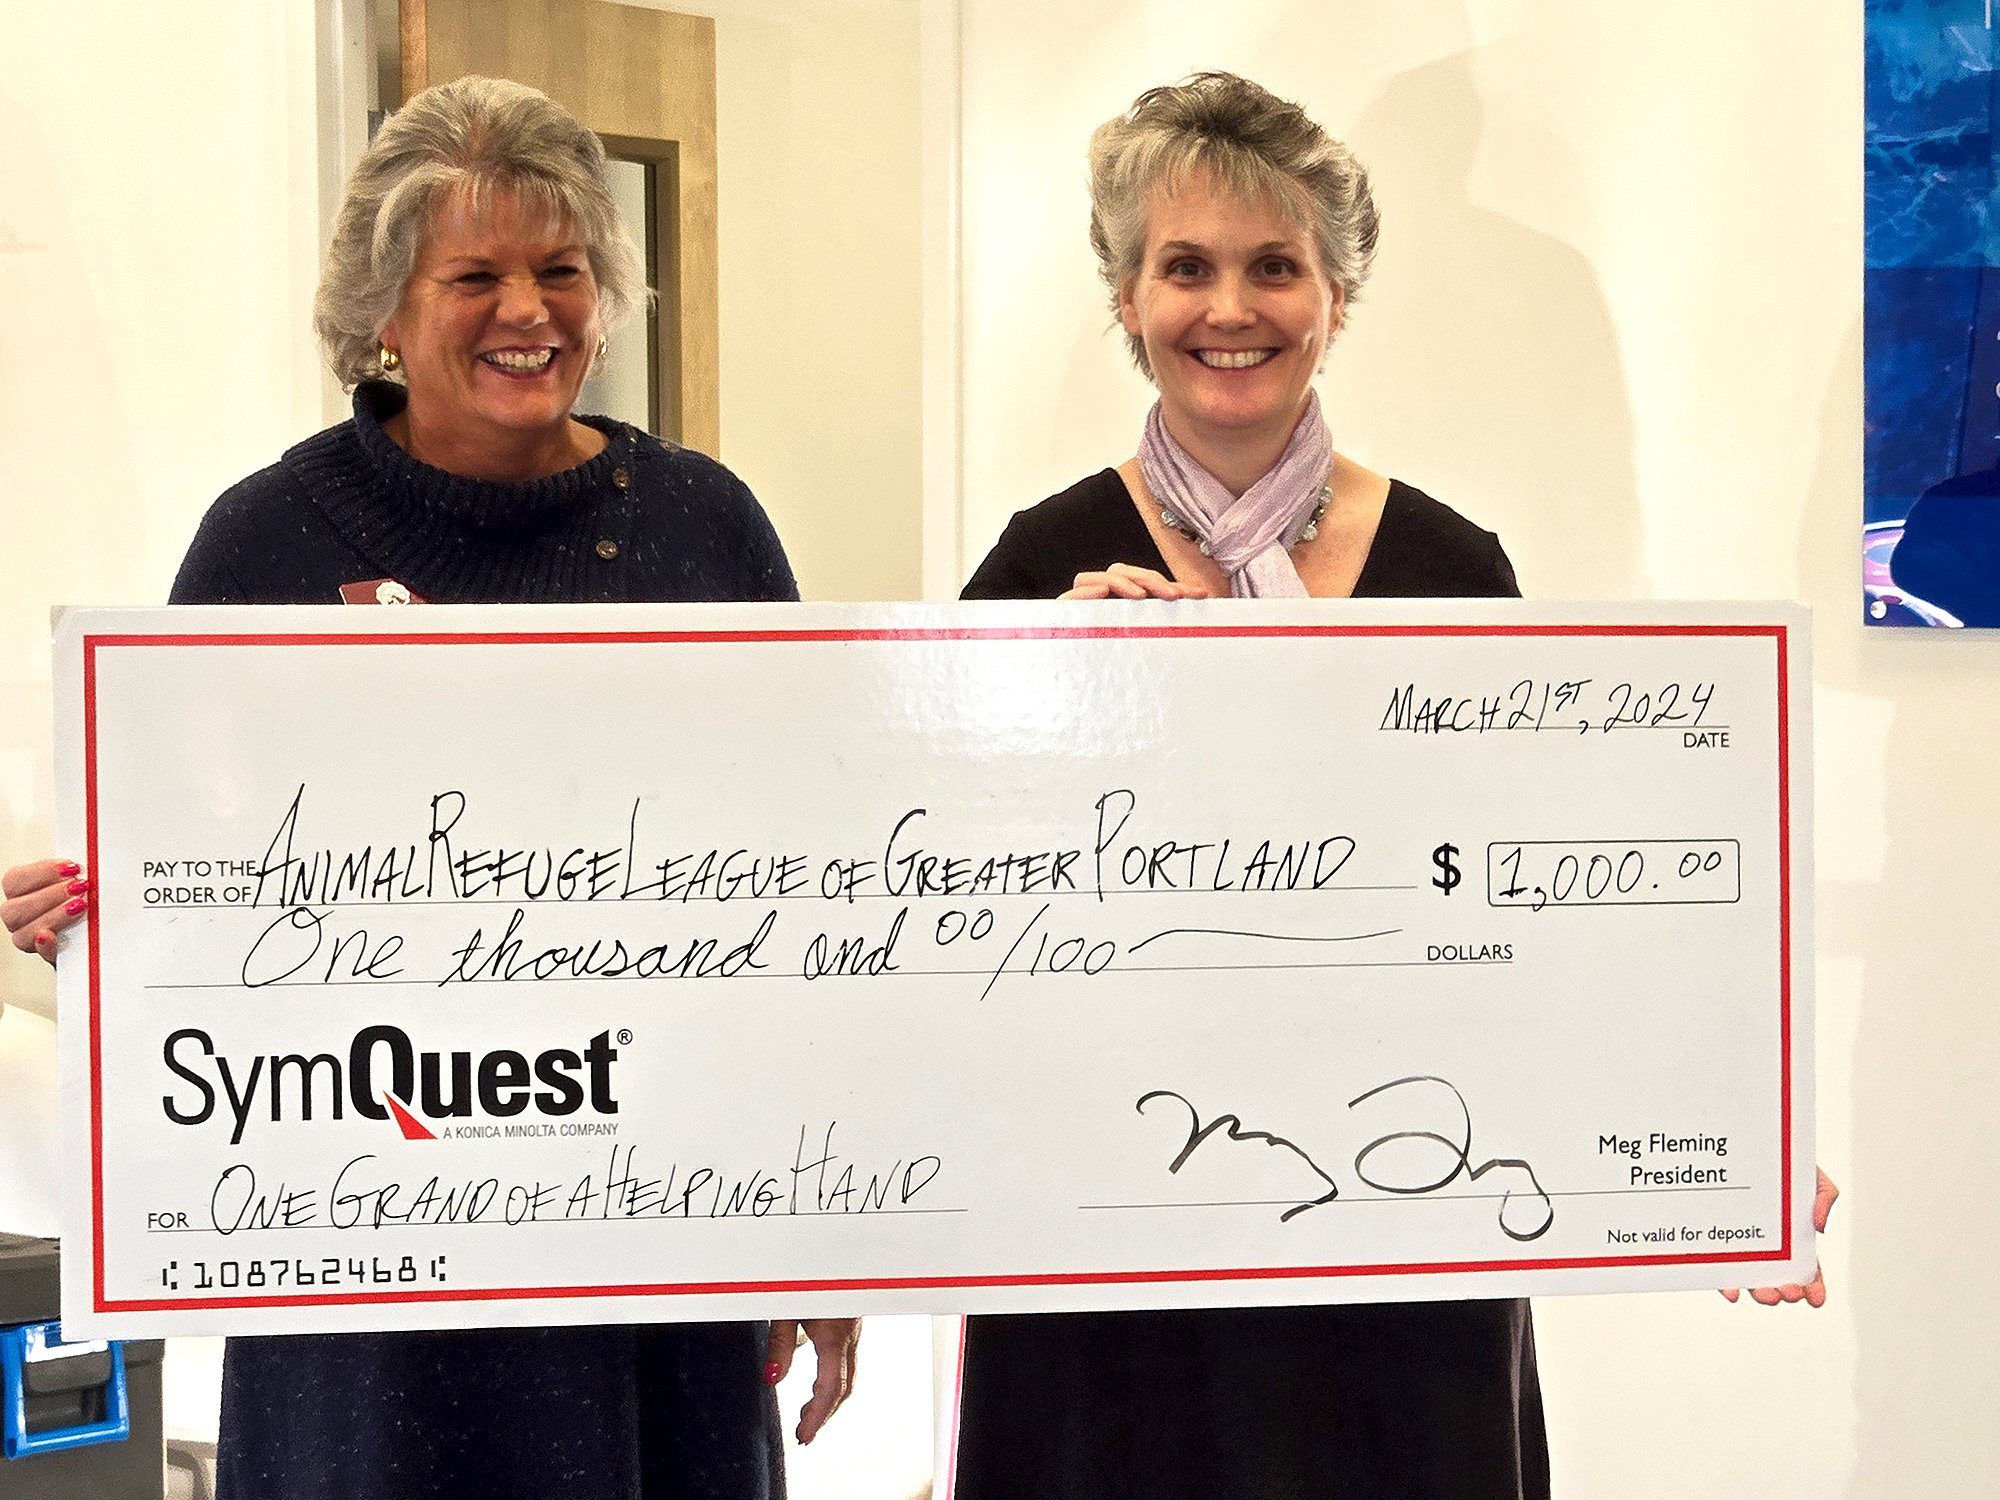 Animal Refuge League of Greater Portland Receives Check at SymQuest Westbrook Ribbon Cutting